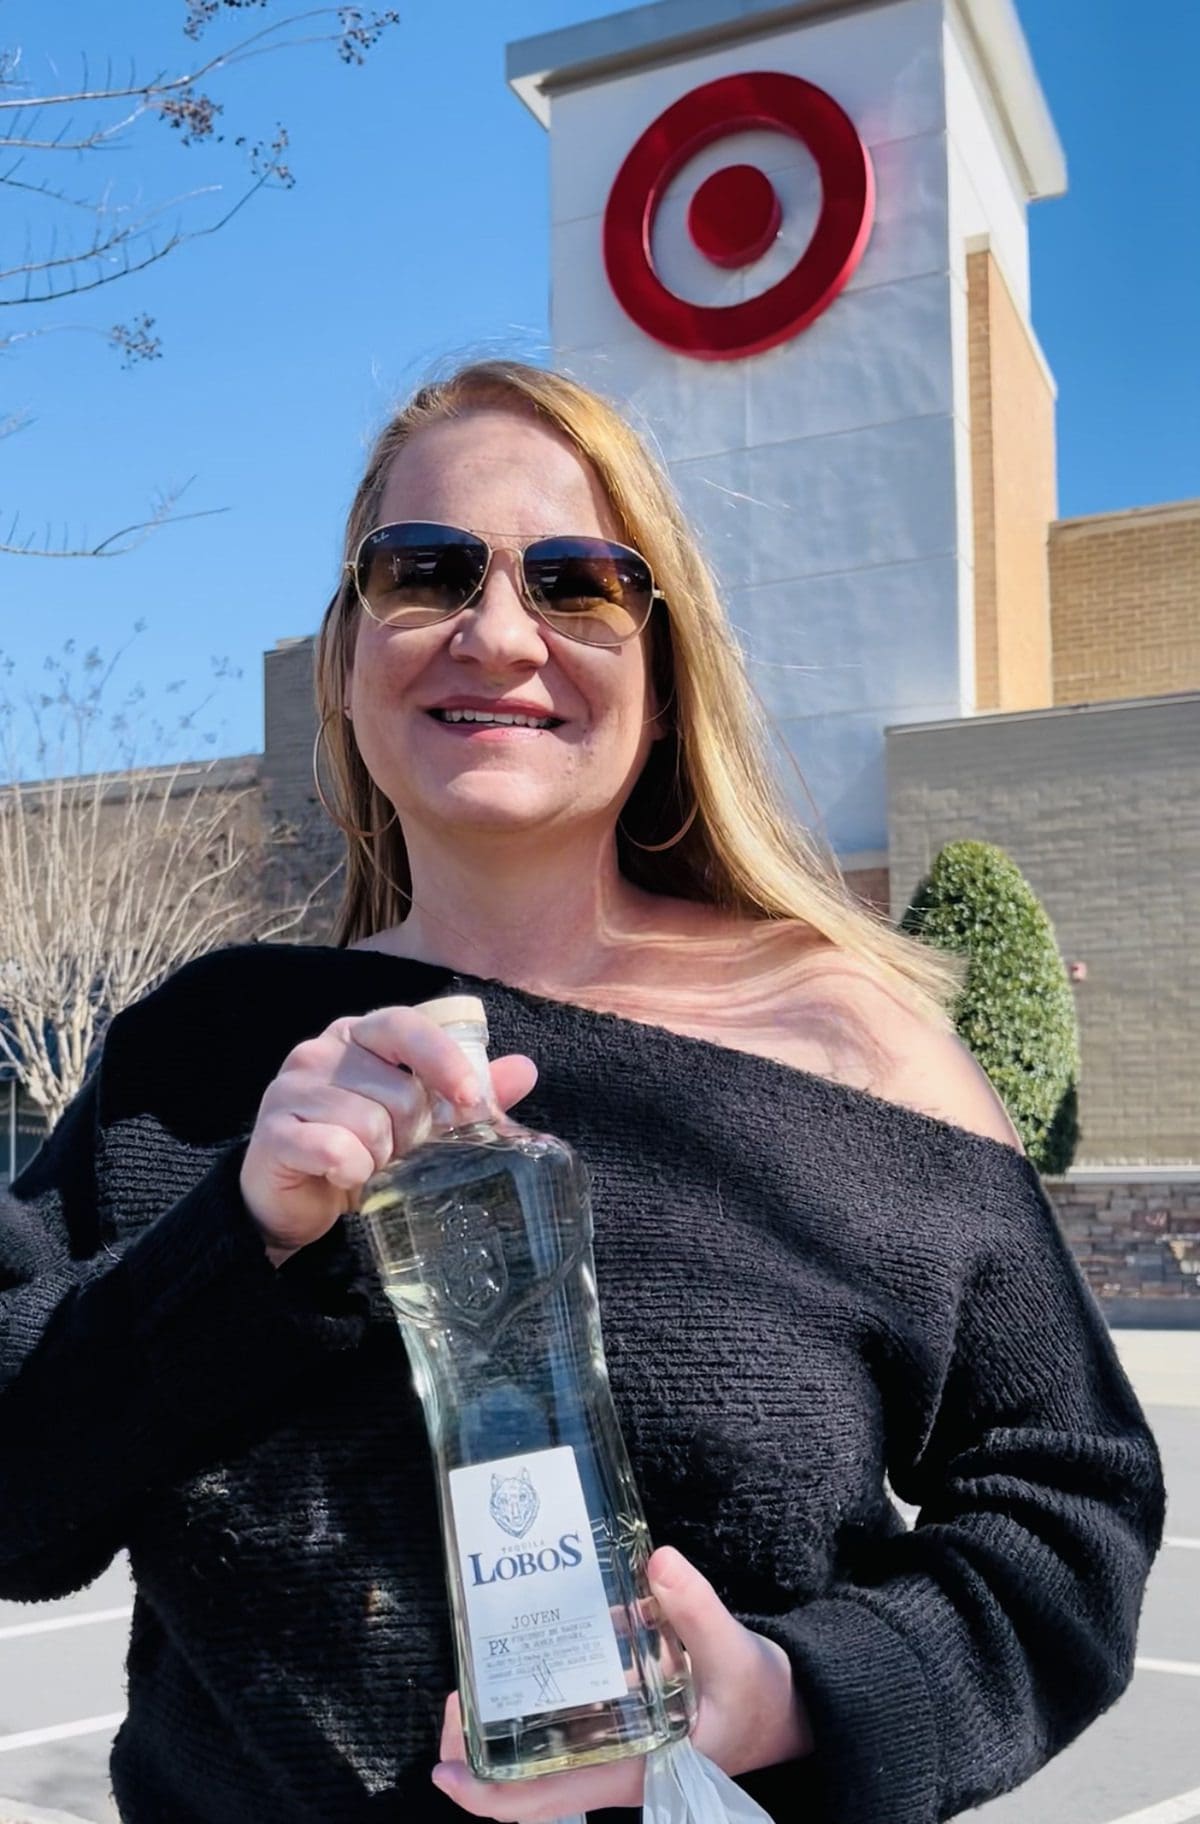 Blog owner holding a bottle of Lobos Tequila in front of the Target logo.